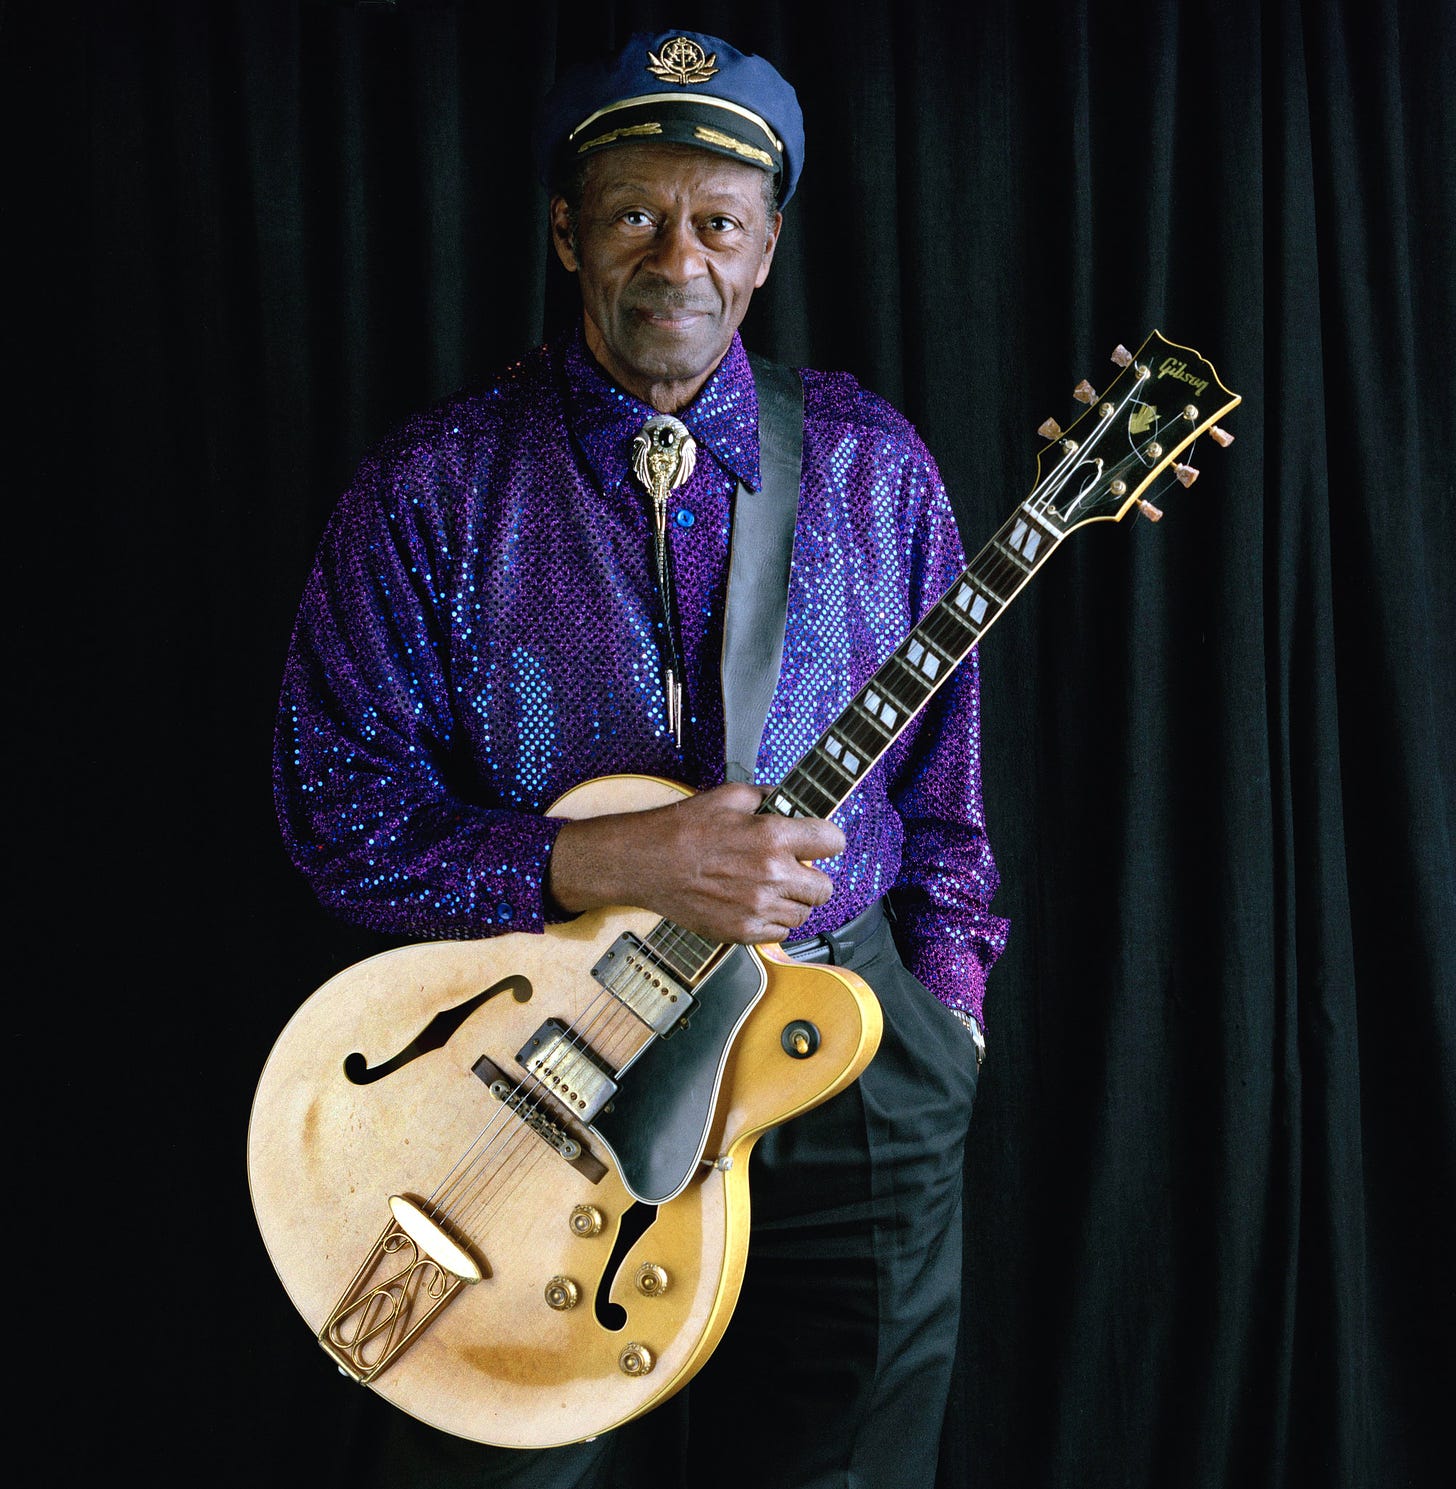 Chuck Berry, Rock 'n' Roll Pioneer, Dies at 90 - The New York Times